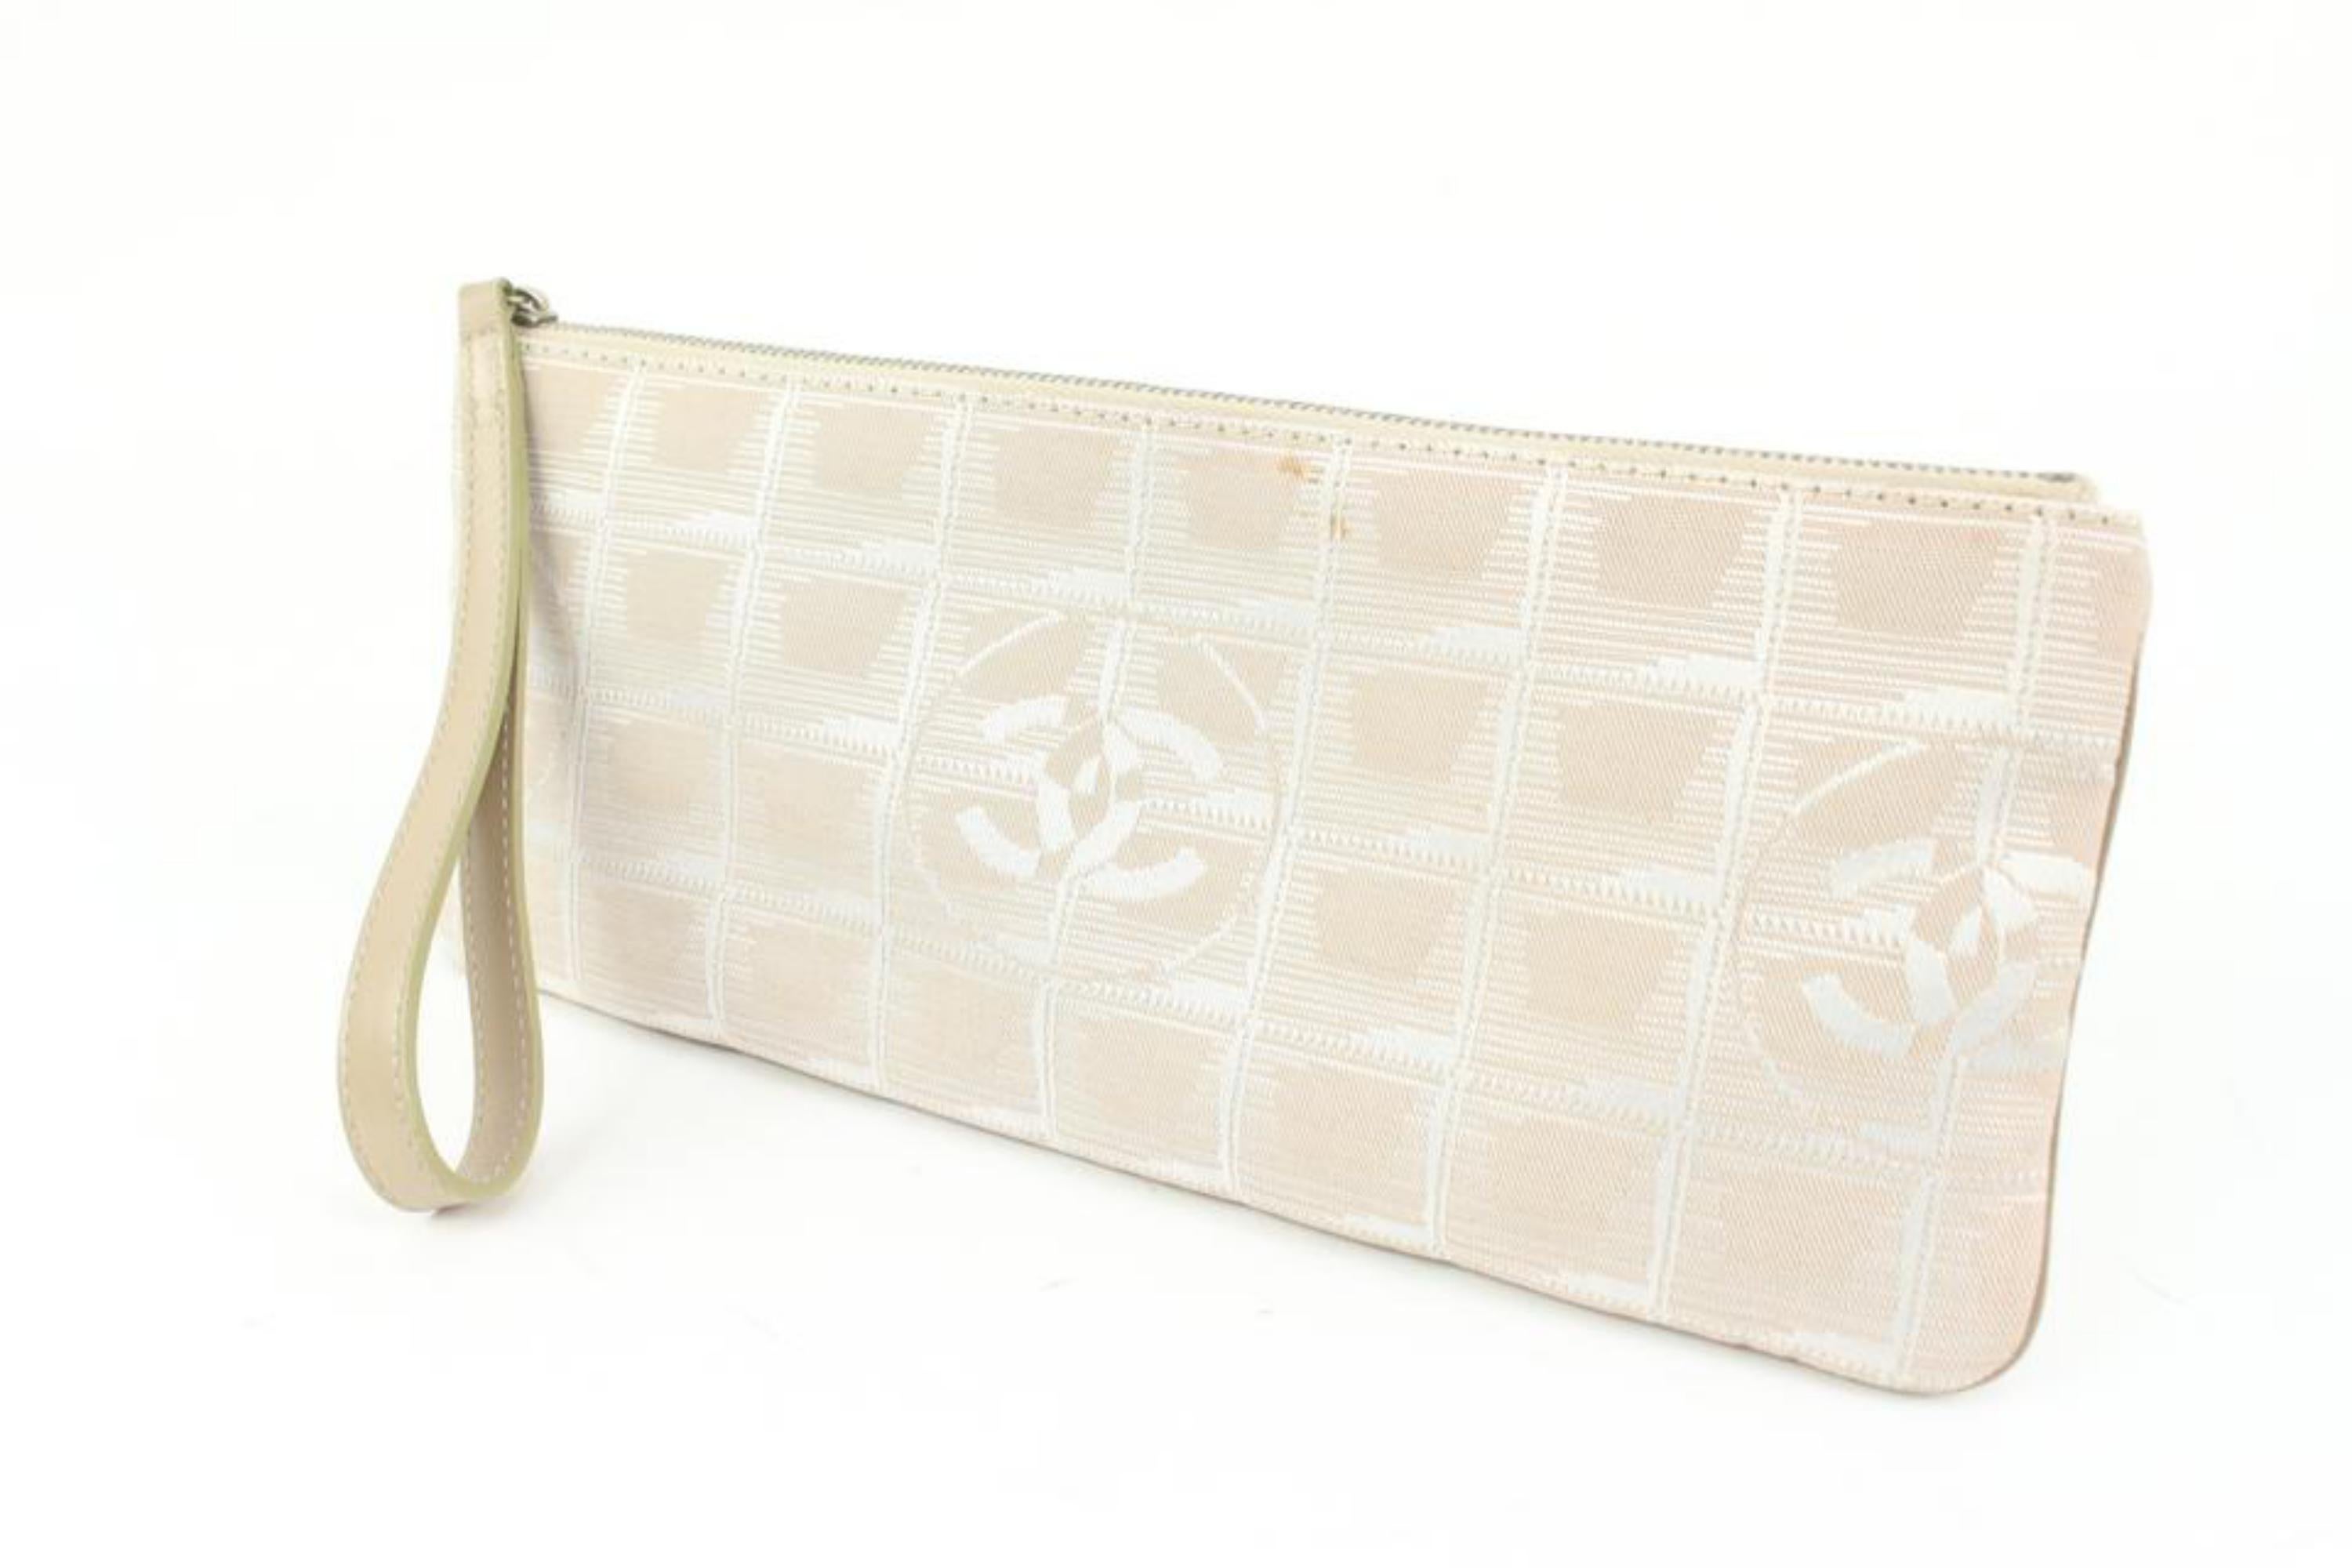 Chanel Beige New Line Pochette Wristlet Clutch 23ck324s
Date Code/Serial Number: 7382763
Made In: Italy
Measurements: Length:  10.5